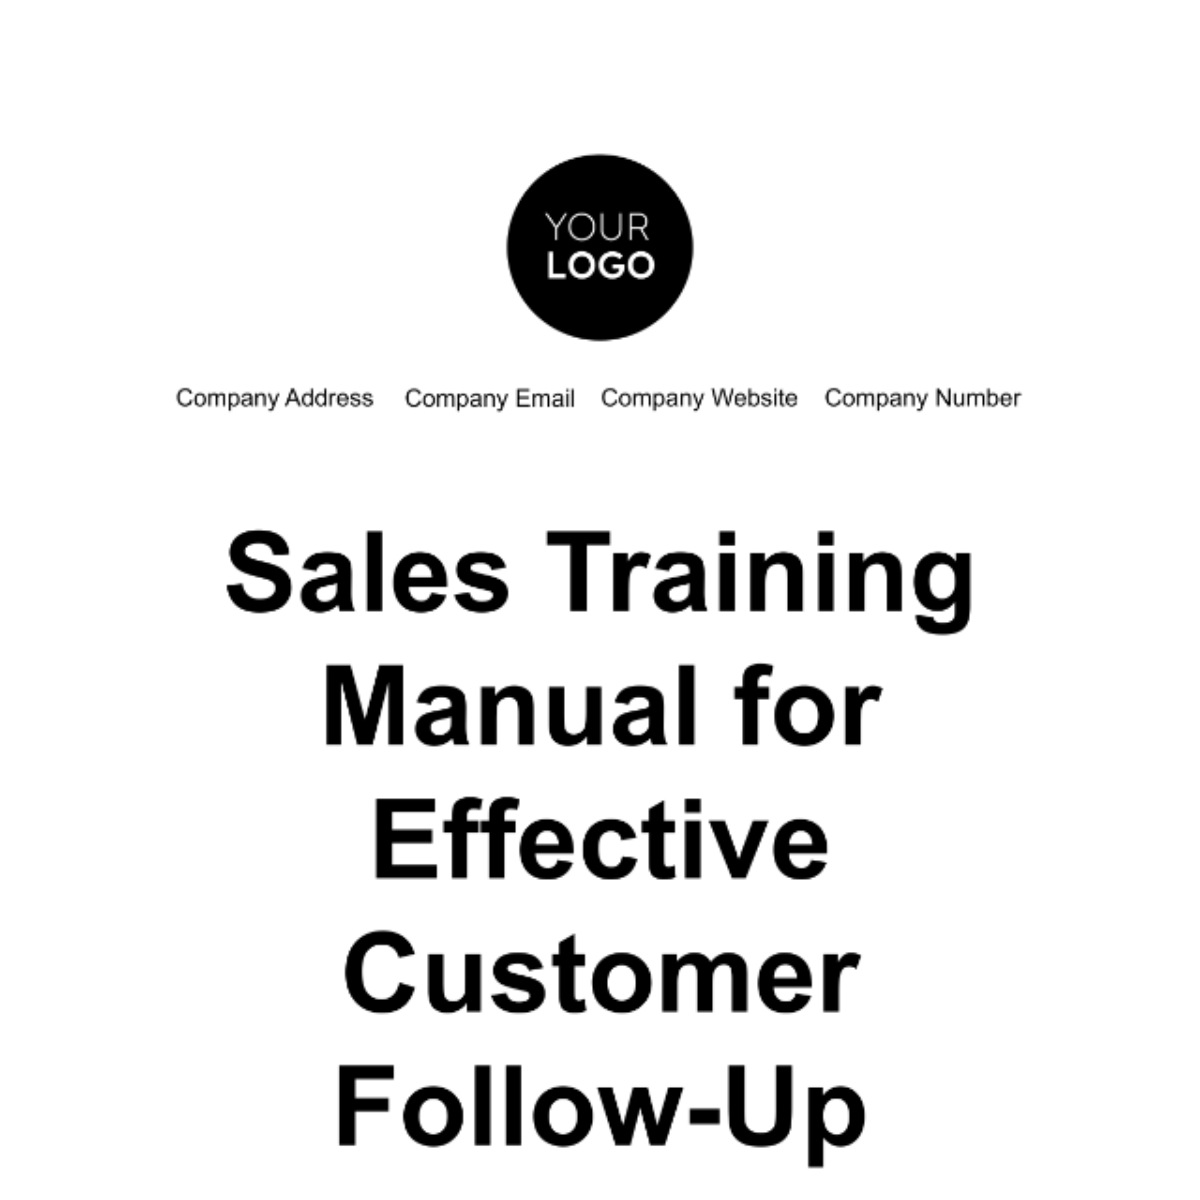 Sales Training Manual for Effective Customer Follow-Up Template